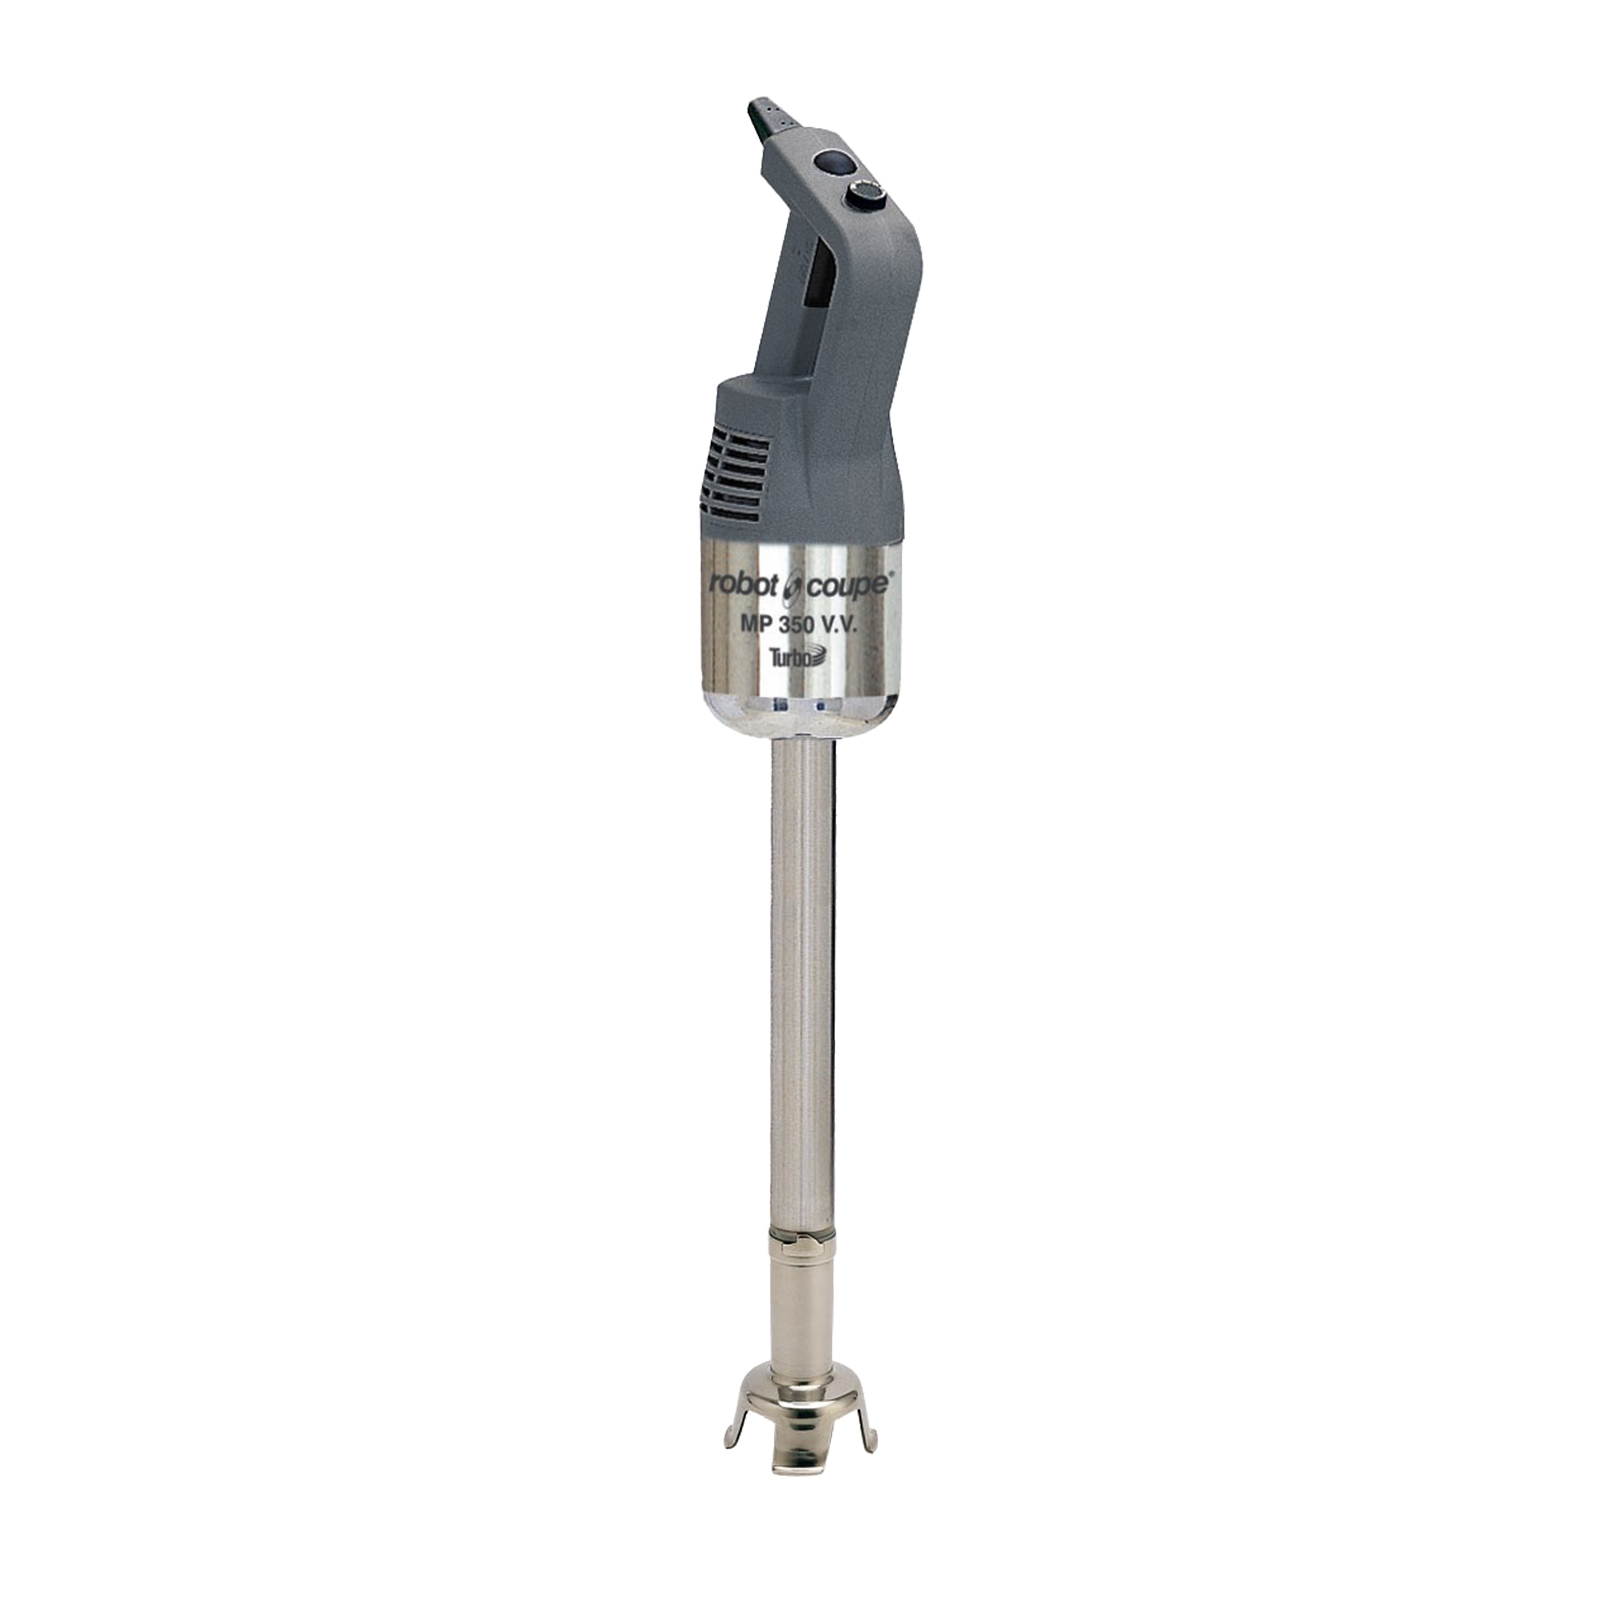 Commercial Power Mixer, hand
held, 14&quot; stainless steel
shaft, removable stainless
steel foot &amp; blade, includes:
(1) stainless steel wall
support &amp; (1) blade
disassembly tool, 50 liter
processing capacity, variable
speed 3,000 - 10,000 RPM, 1
HP, 120v/60/1-ph, 5.5 amps,
660 watts, NEMA 5-15P, &quot;Easy
plug&quot; system with detachable
power cord, cETLus,
ETL-Sanitation, 1 year
replacement warranty 